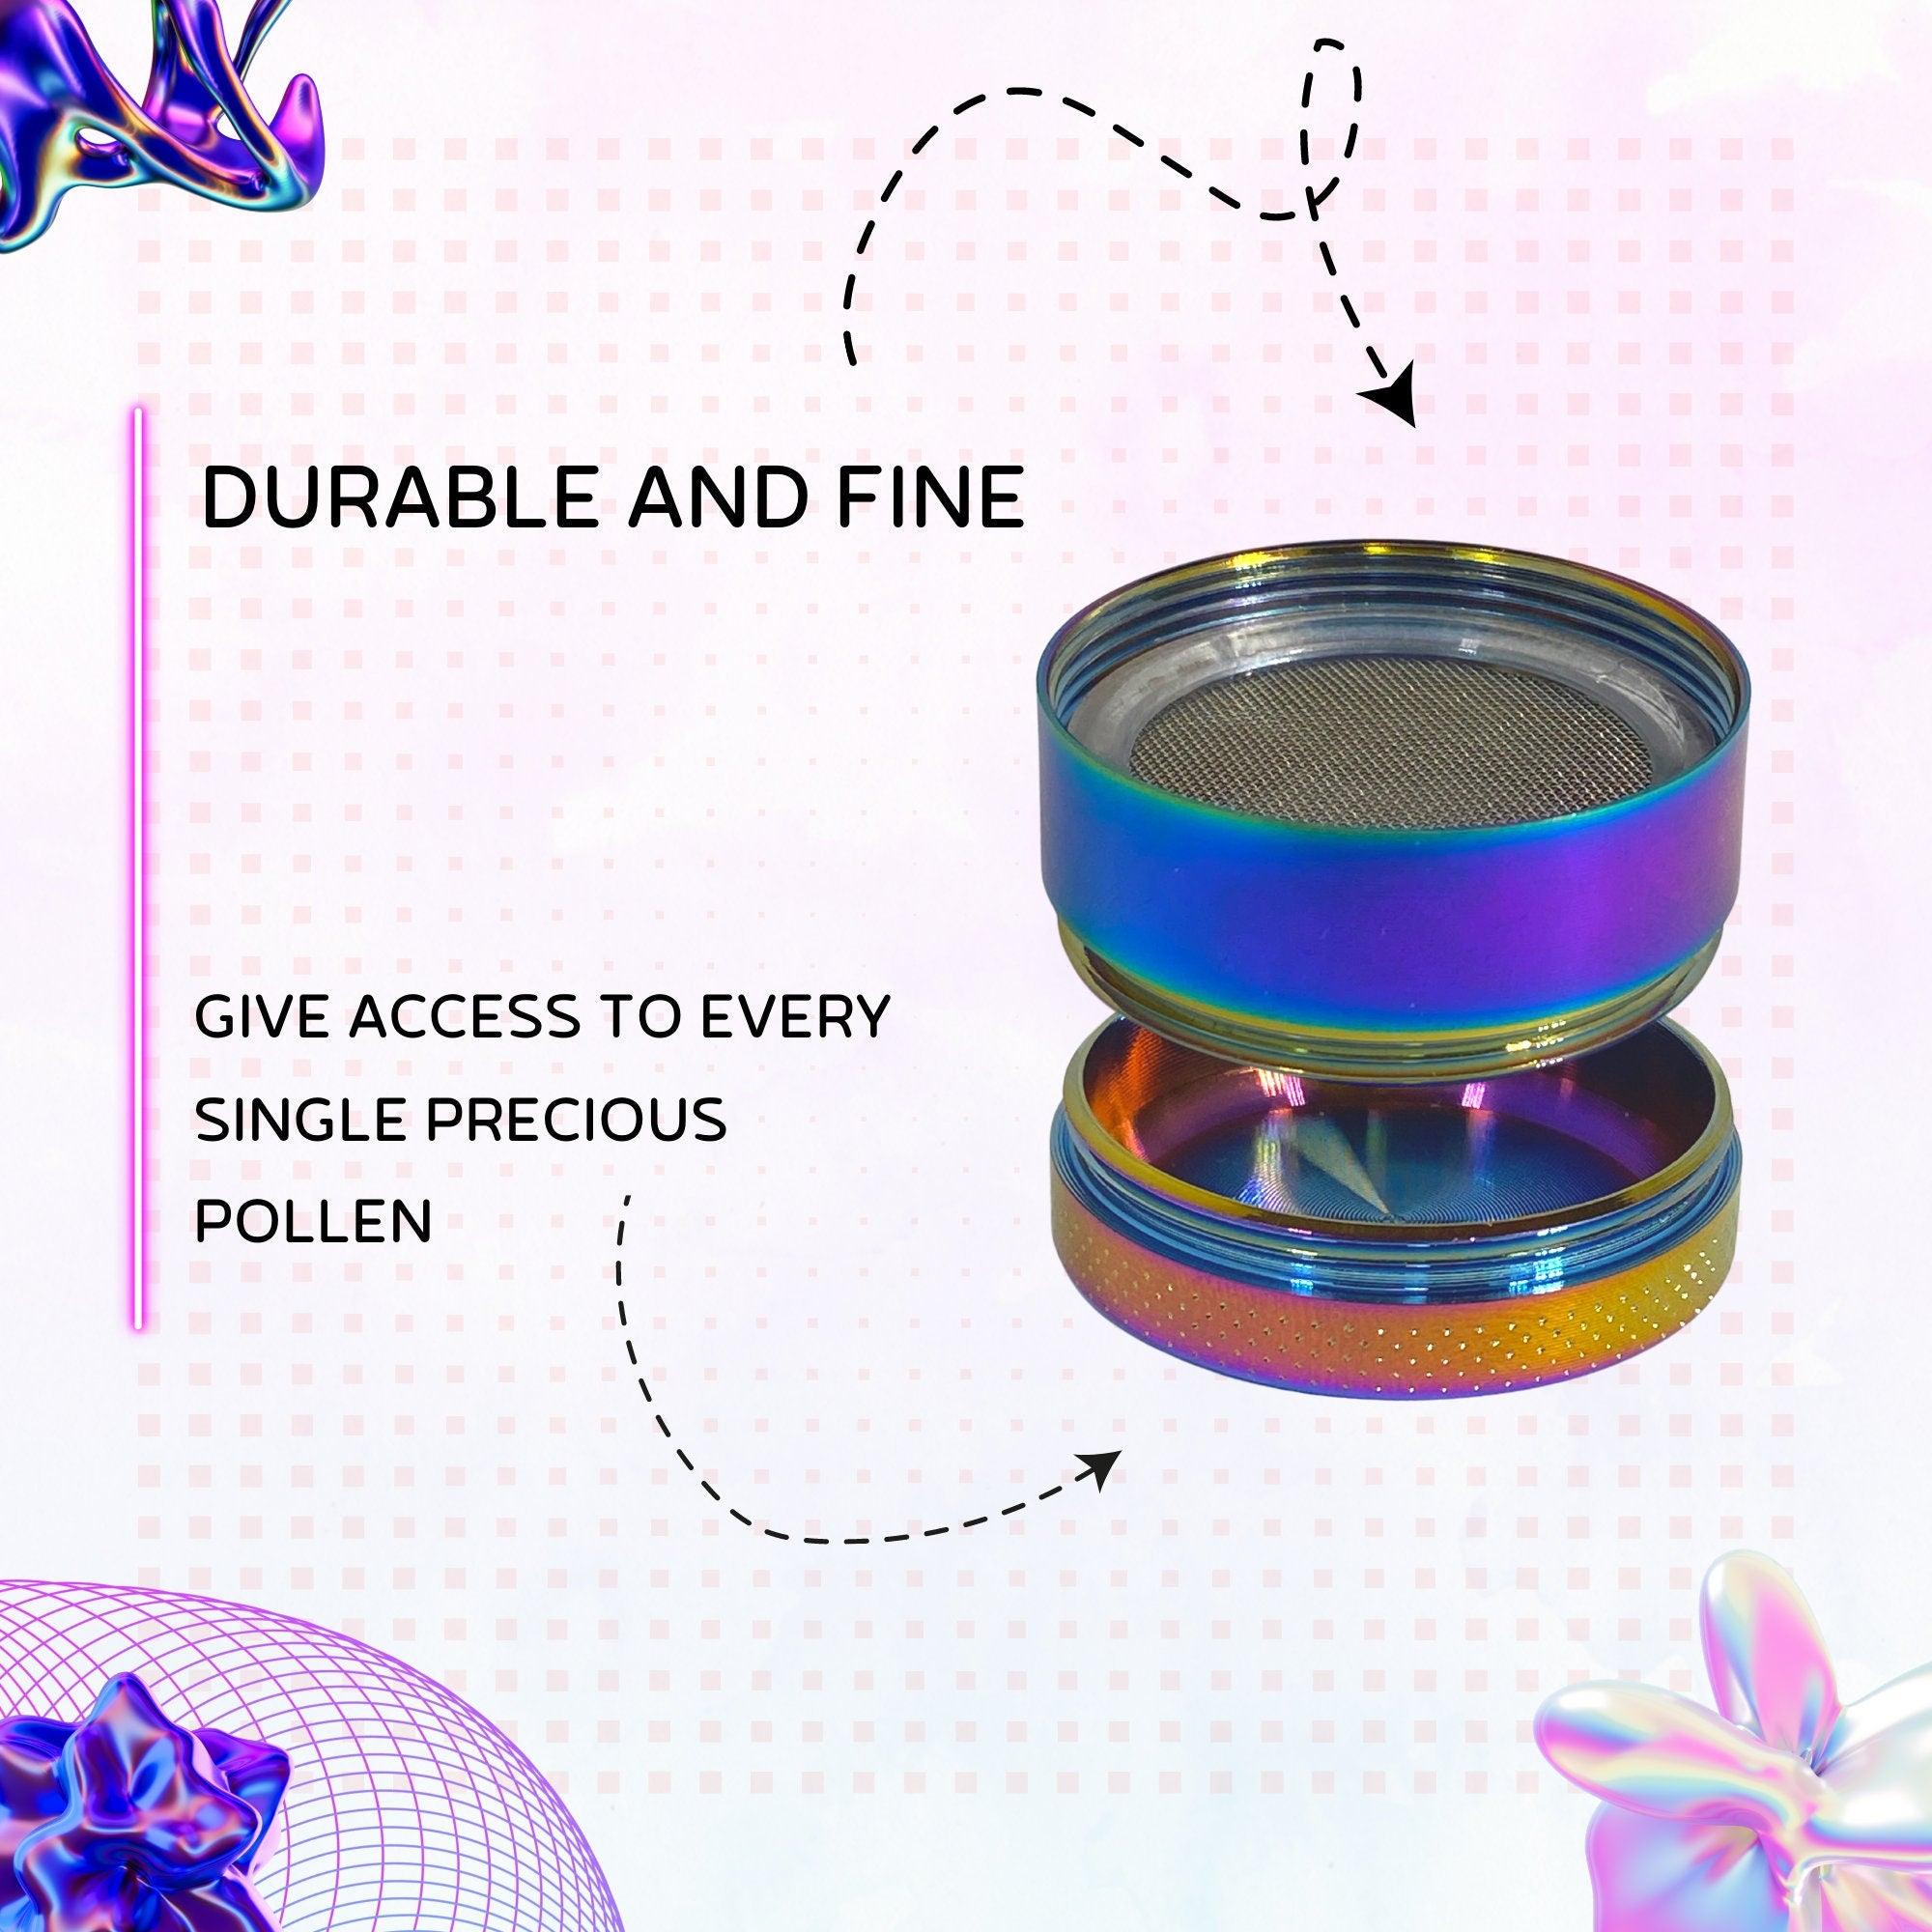 Iridescent Weed Grinder | Pocket size, Spice cannabis grinders, weed accessories,Pink, Psychedelic Rainbow Herb Girly, Tobacco Crusher Smoke